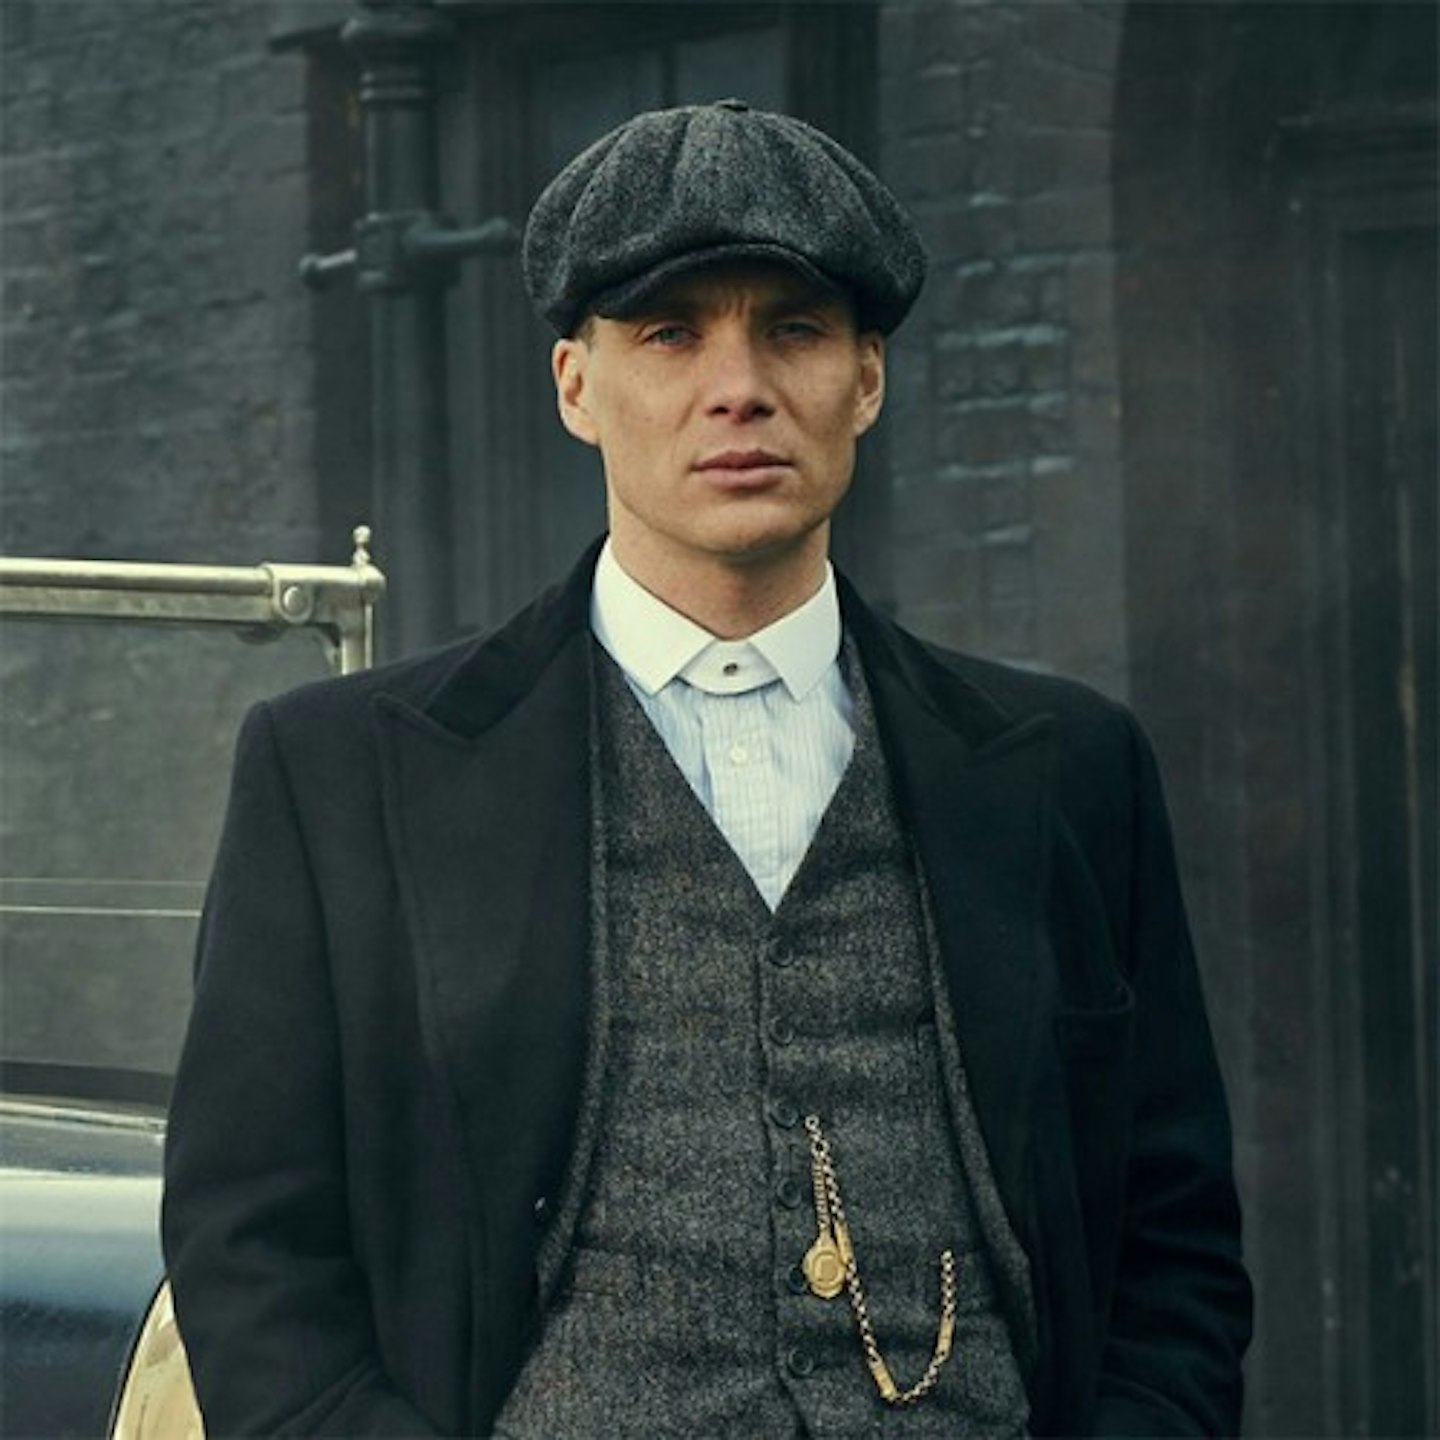 7 Life Lessons from the Gritty World of Peaky Blinders